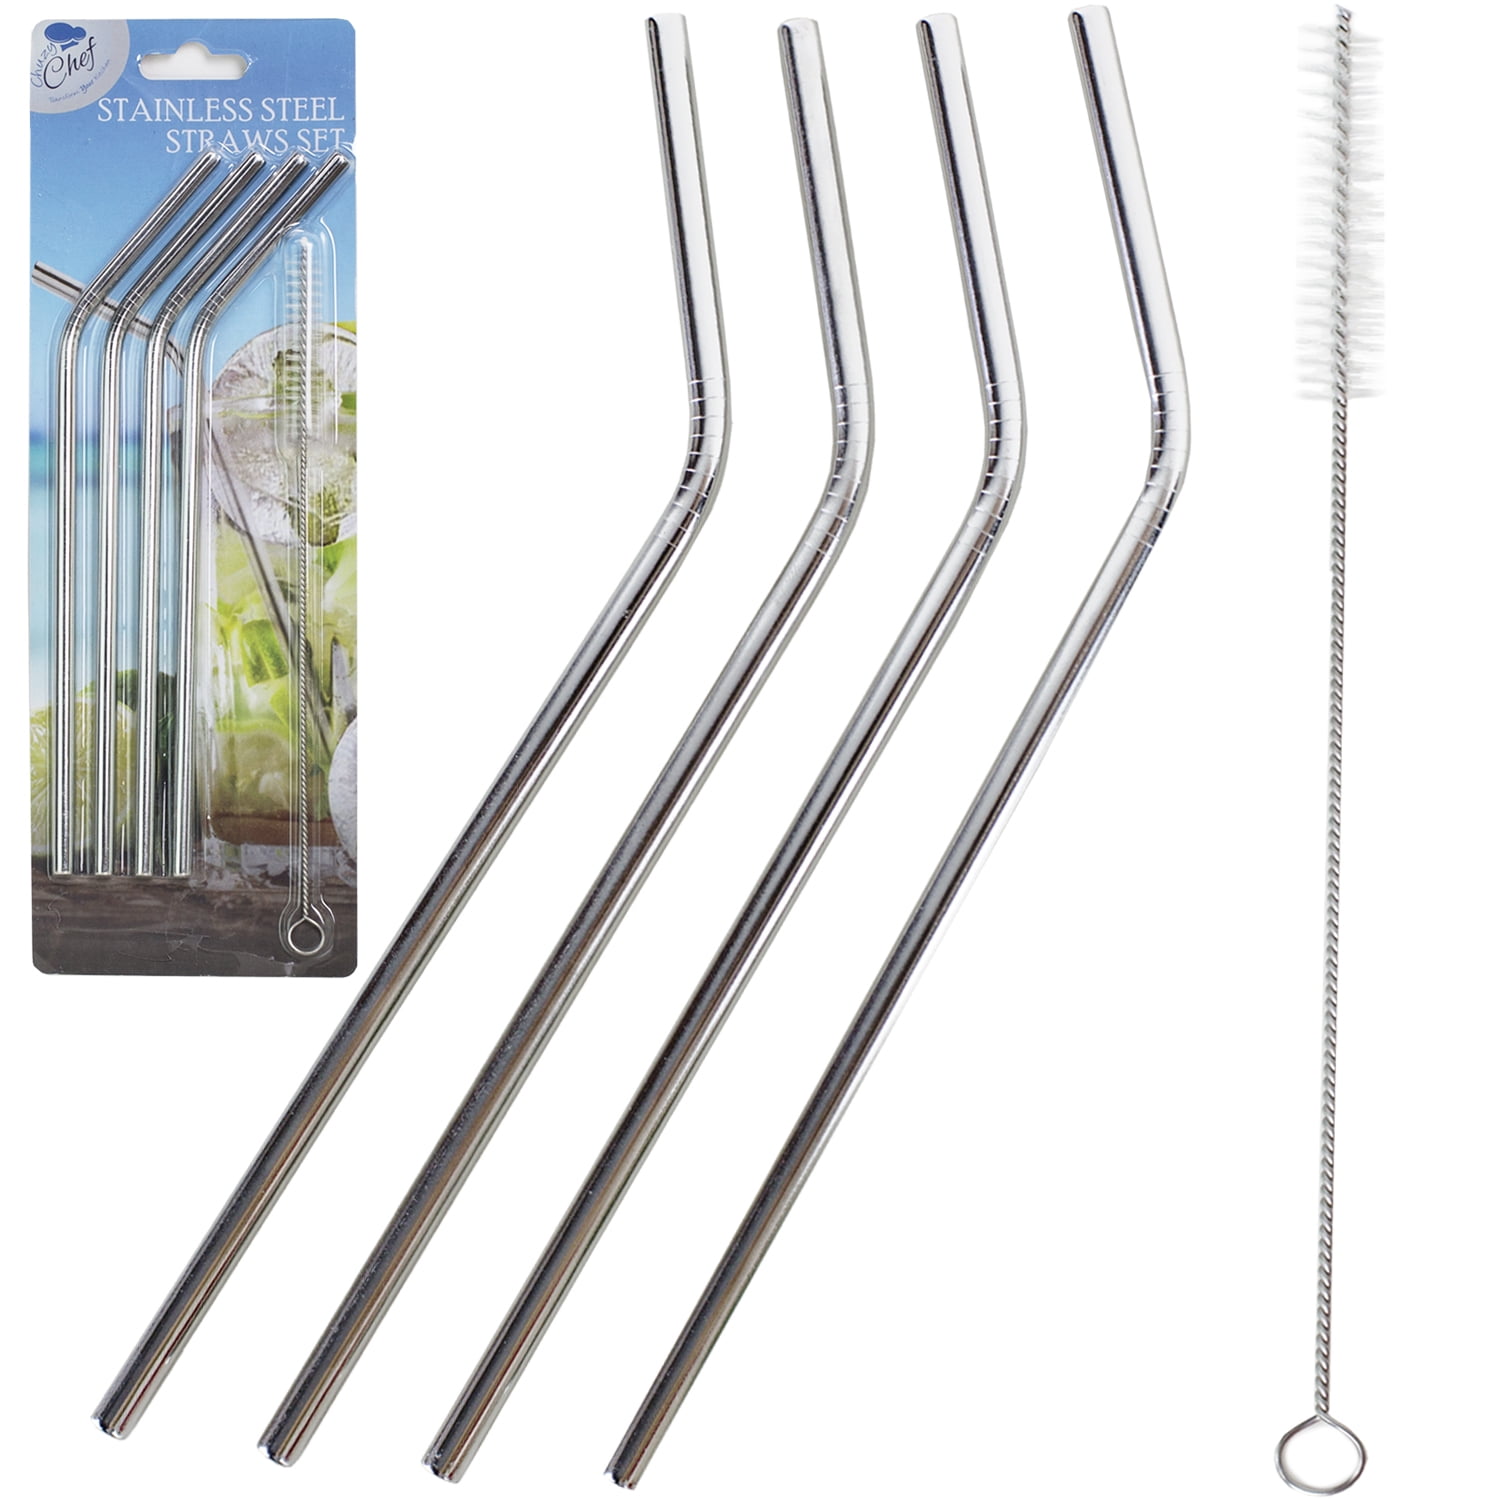 Stainless Steel 4er Set Drinking Straws Straws Reusable with Cleaning Brush 